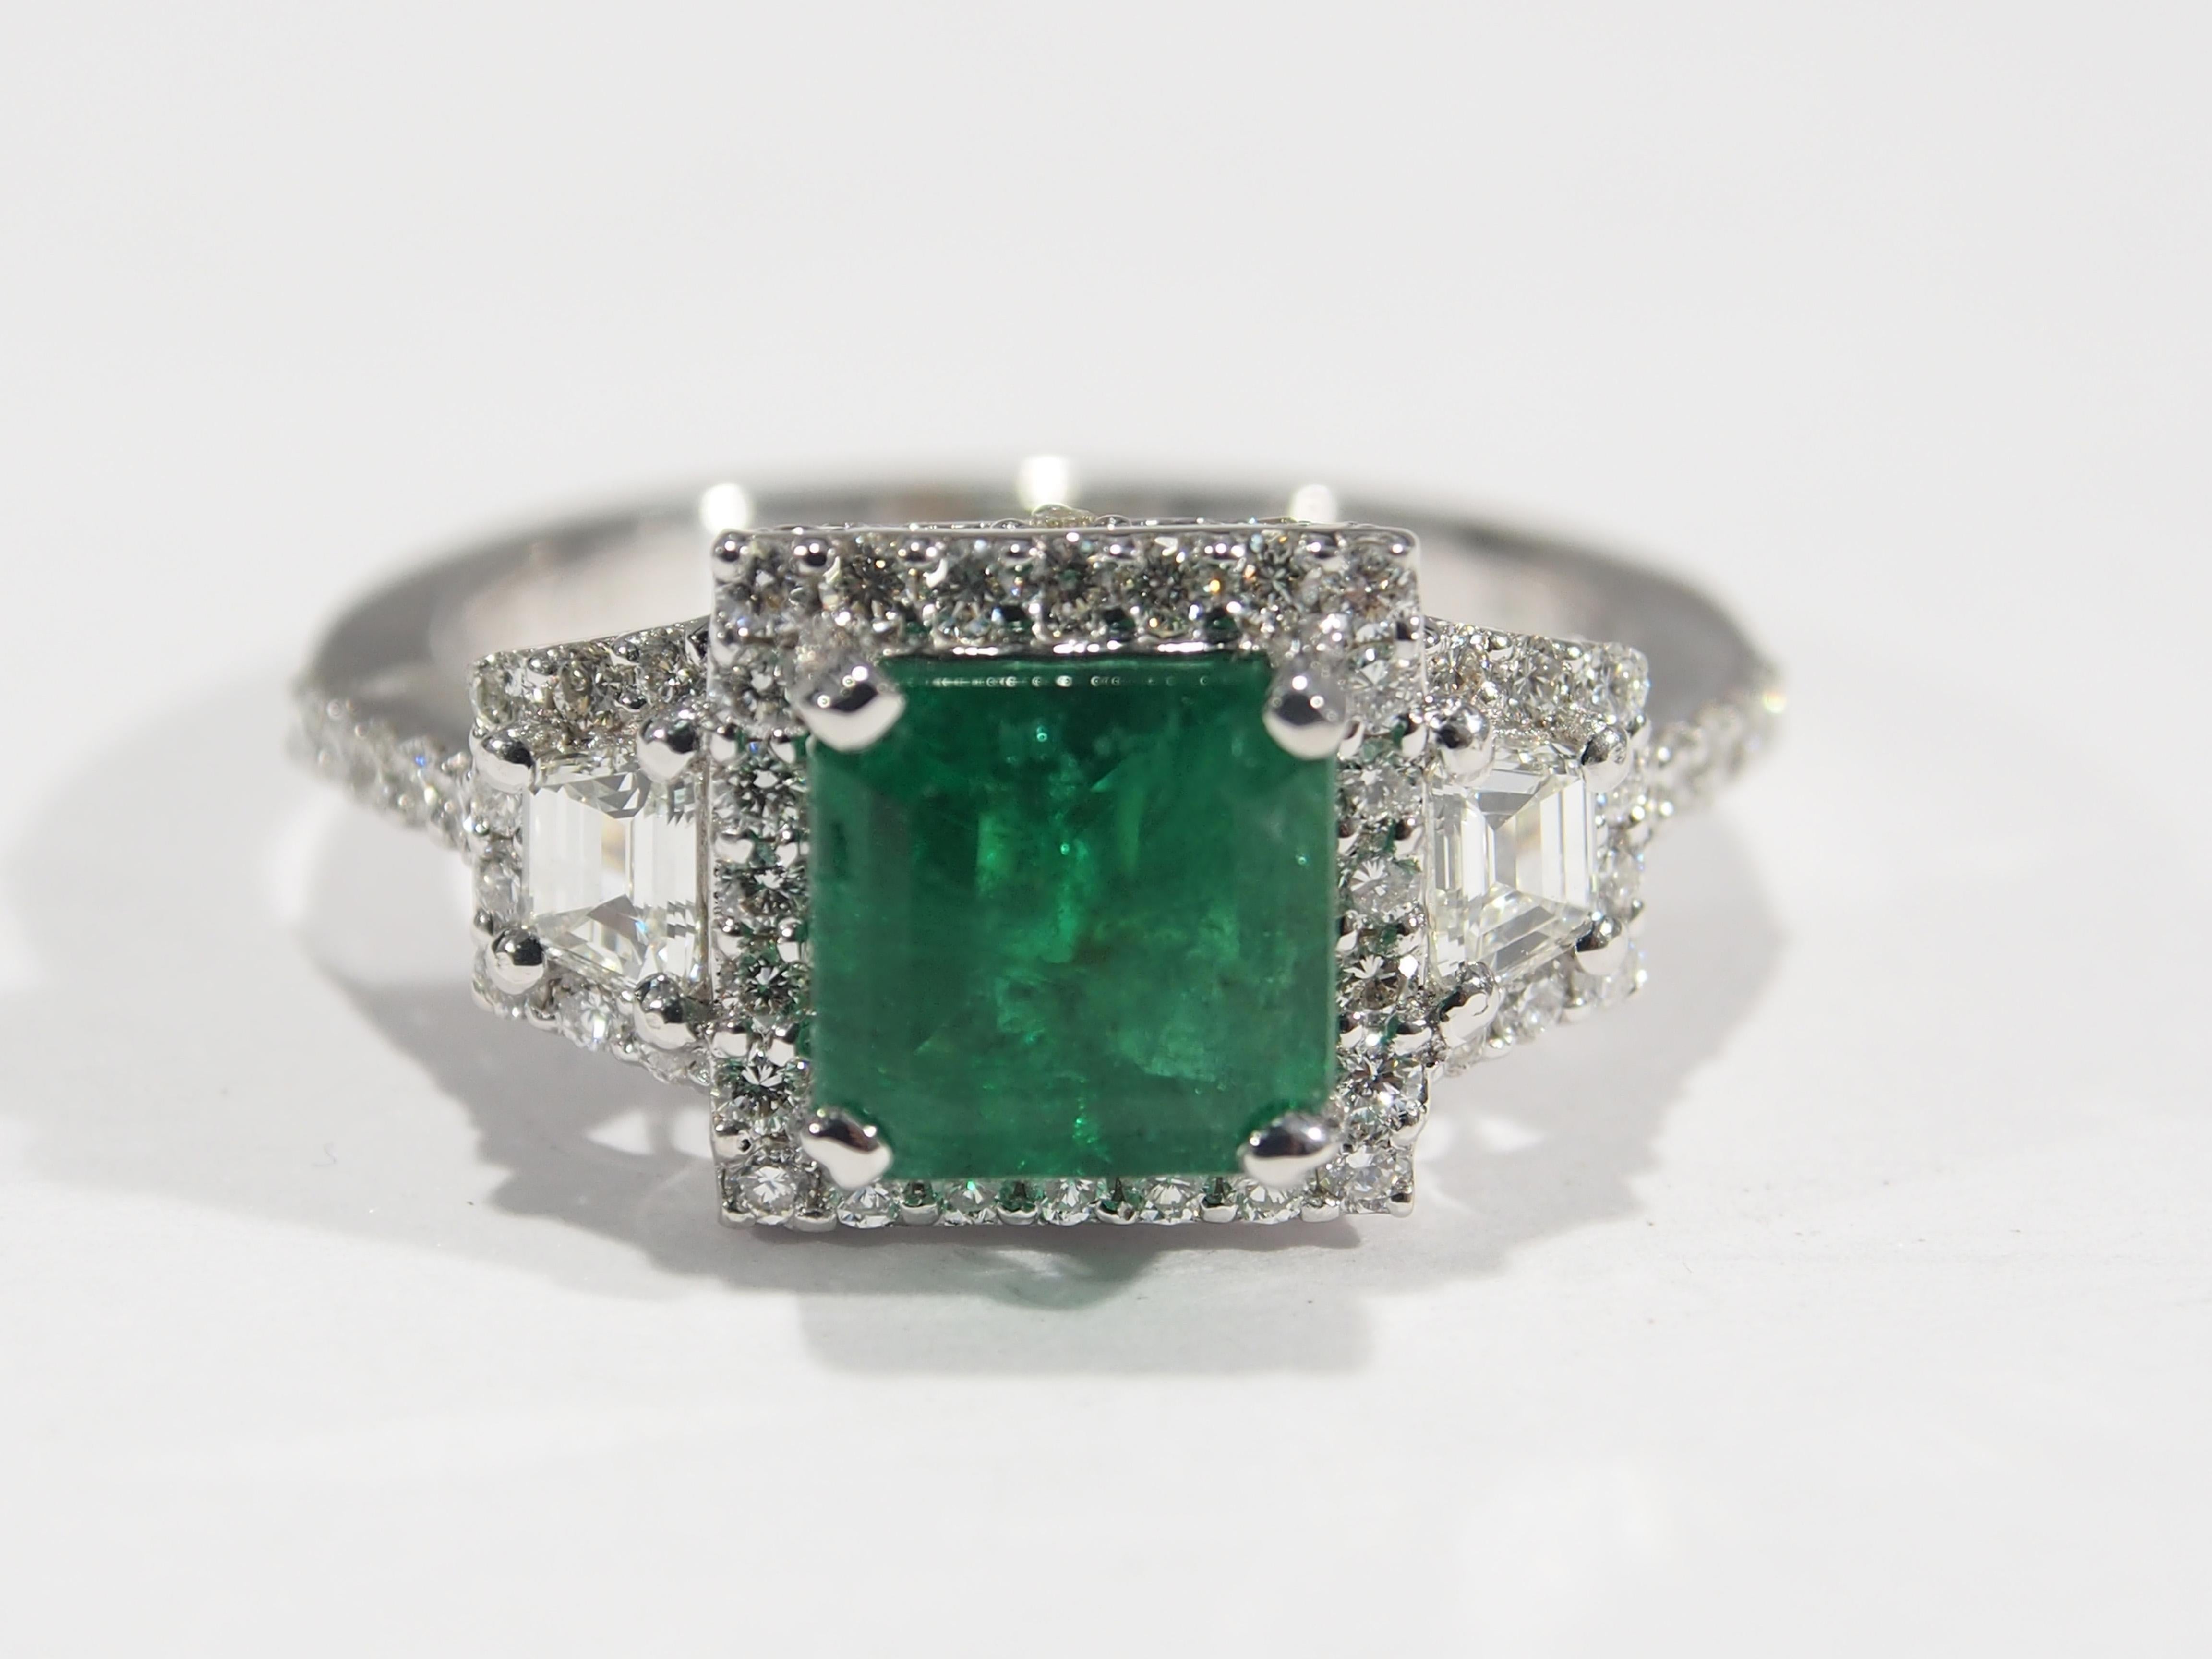 A beautiful Natalie K. 18K white gold three stone ring featuring a 1.5ct Emerald with (2) Trapezoid Diamonds and (92) Round Brilliant Cut diamonds surround the Emerald and side Trapezoids. The diamonds are approximately .82 total weight, G-I in